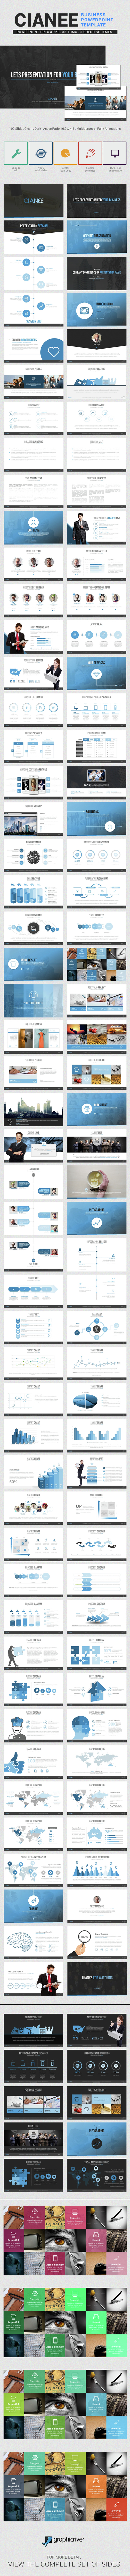 Cianee Business Powerpoint Template